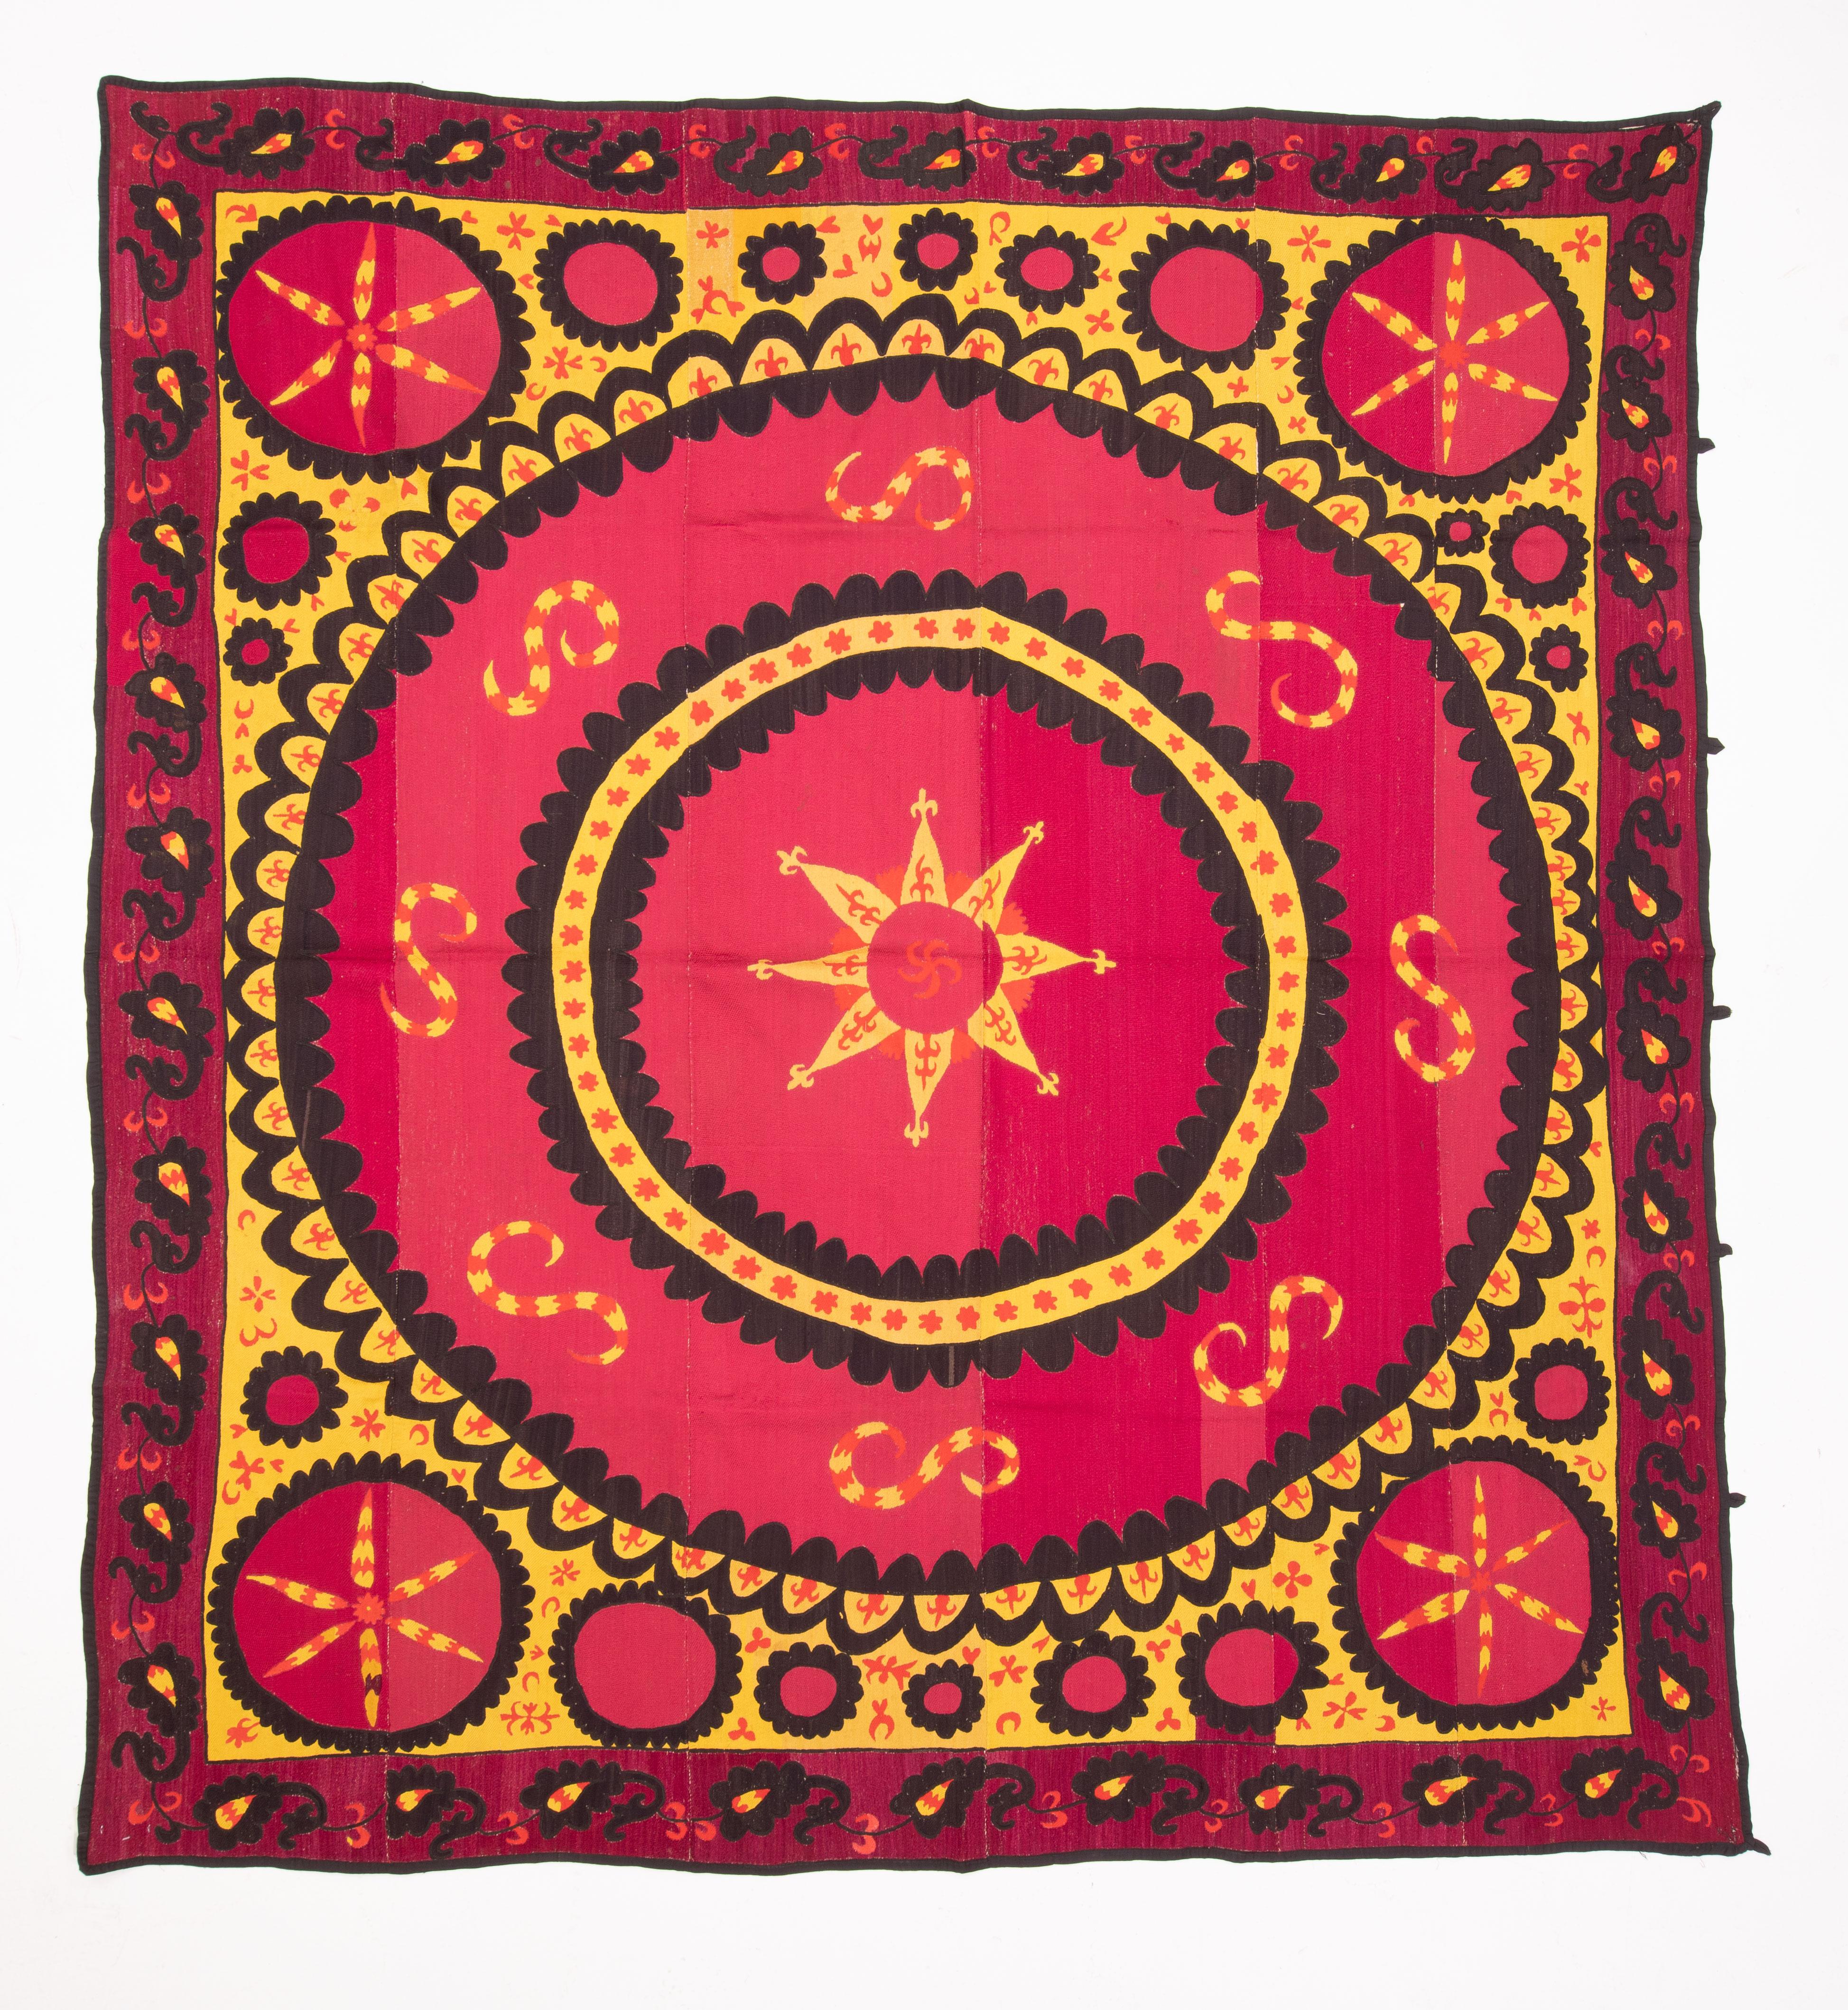 Suzanis from the regions of Tahkent and Pishkent have some astral names such az ‘moon sky’,
‘star sky ‘. The main characteristic of these suzanis is that of their being fully embroidered in silk and sometimes in wool in sections.
Ground cloth is